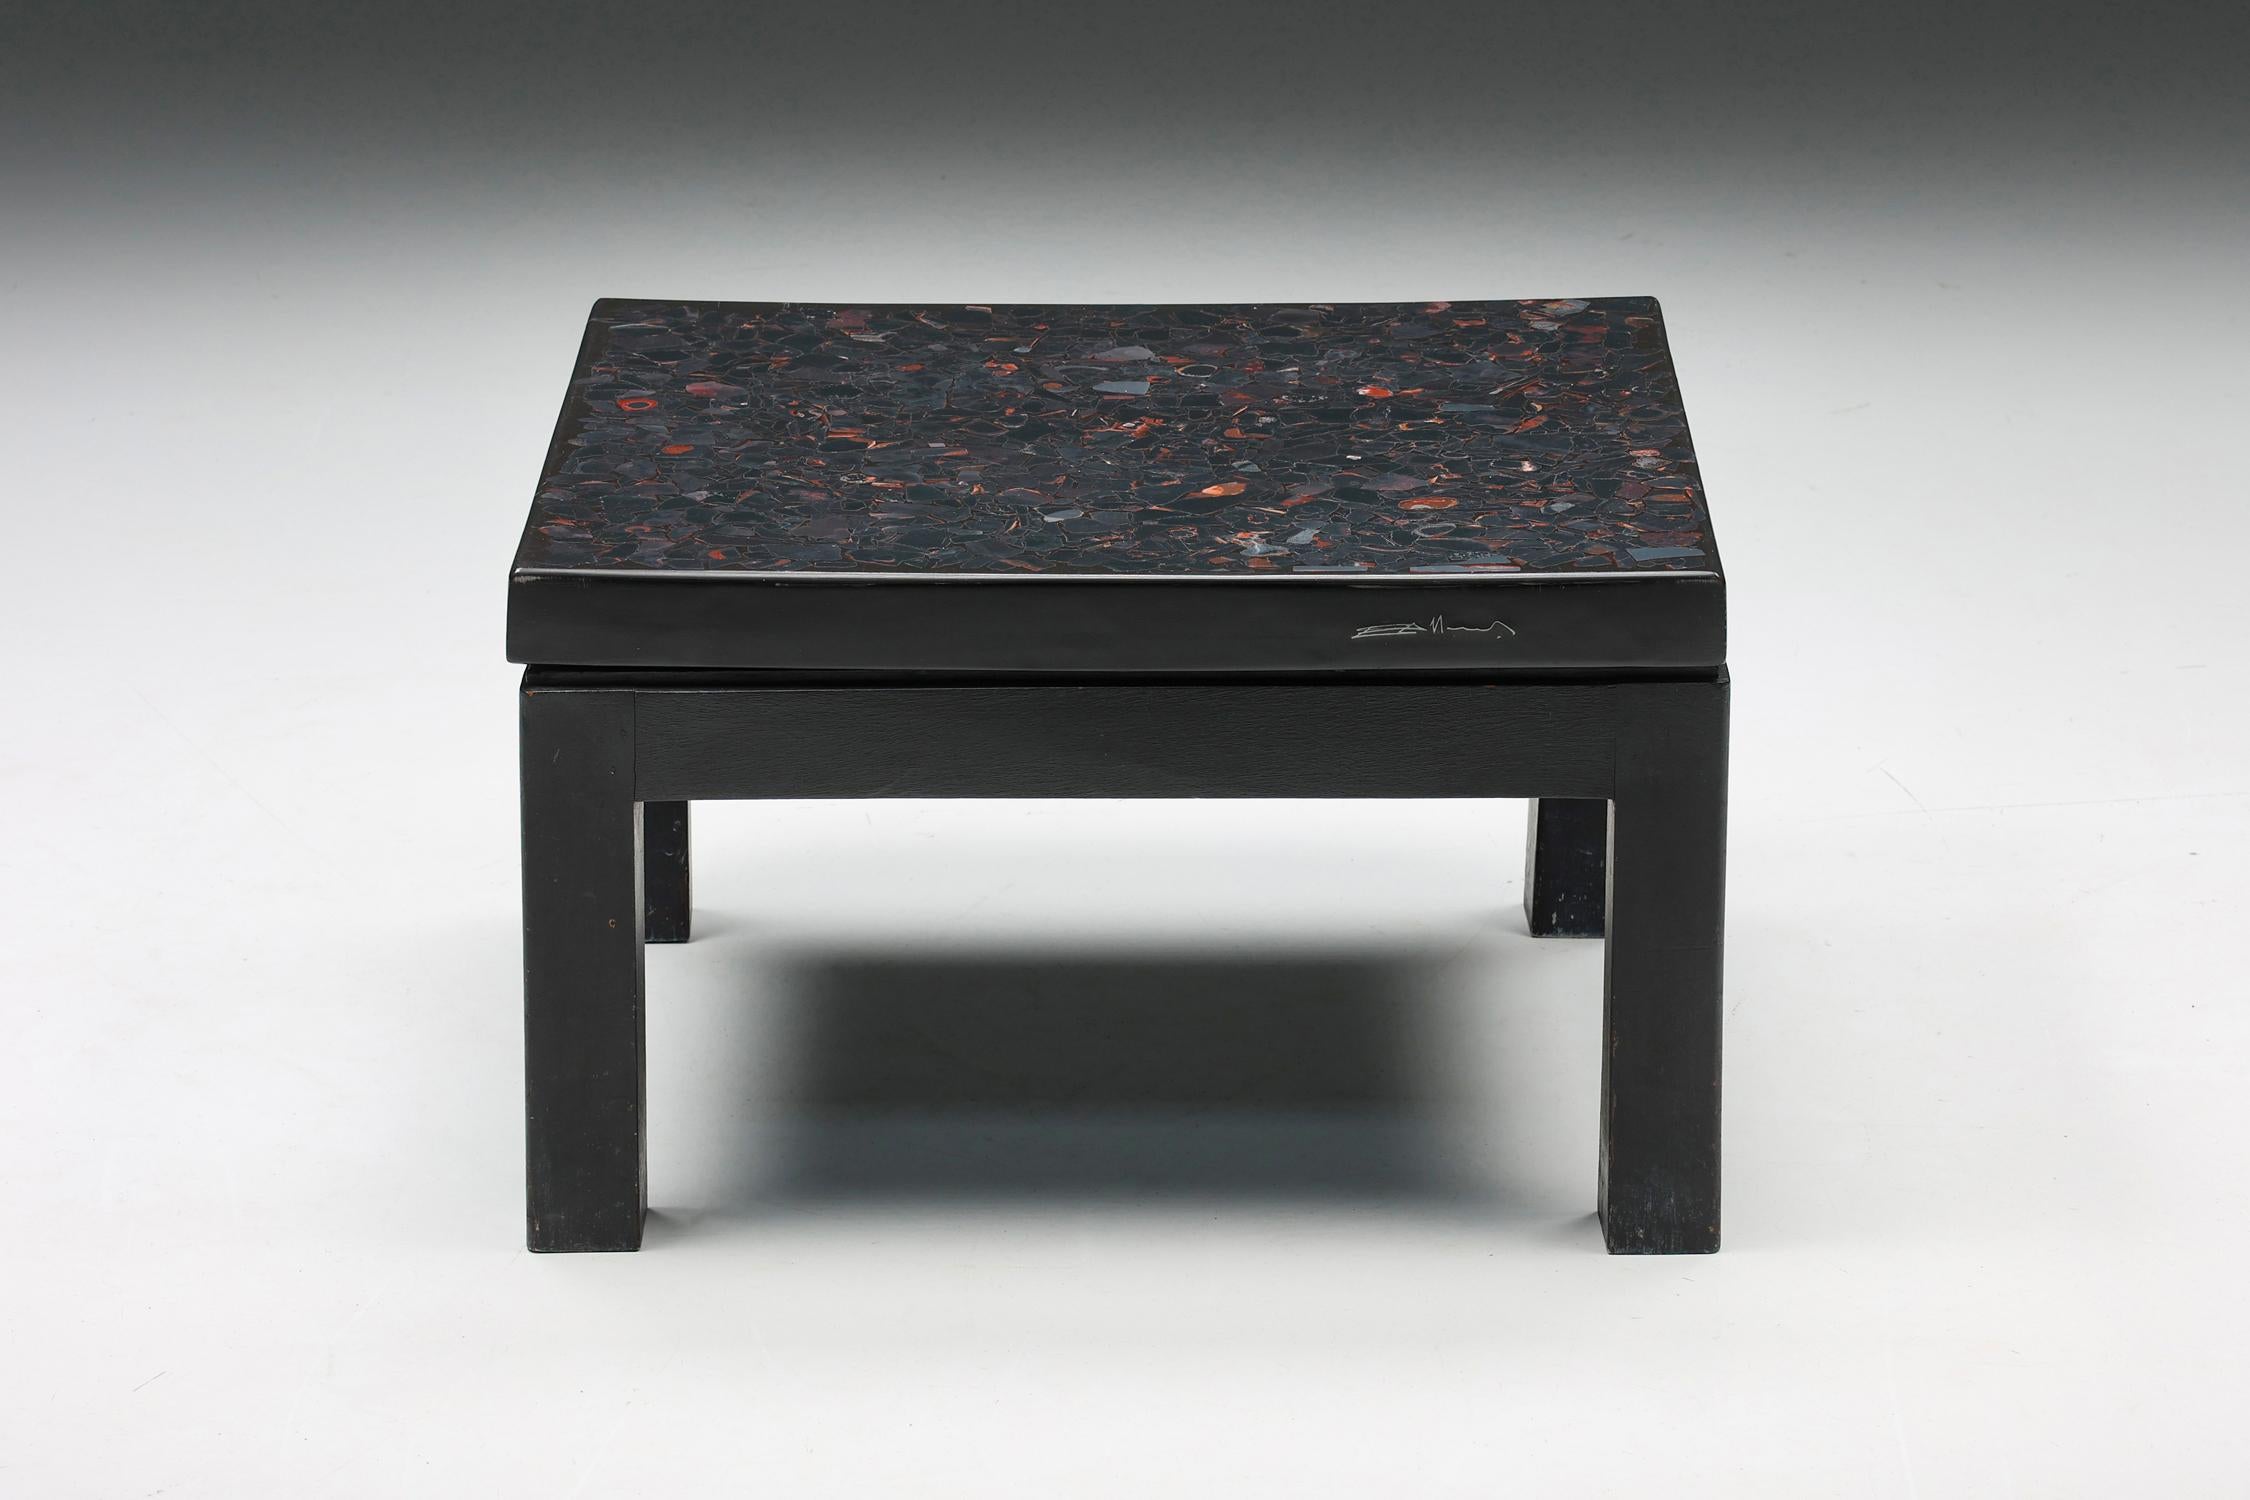 Coffee table by Etienne Allemeersch, Rectangular, with Fossil Inlay, 1970's

This Hollywood regency rectangular coffee table was designed in the Seventies by Etienne Allemeersch, a Belgian artisan. This piece is made of resin with a fossil stone